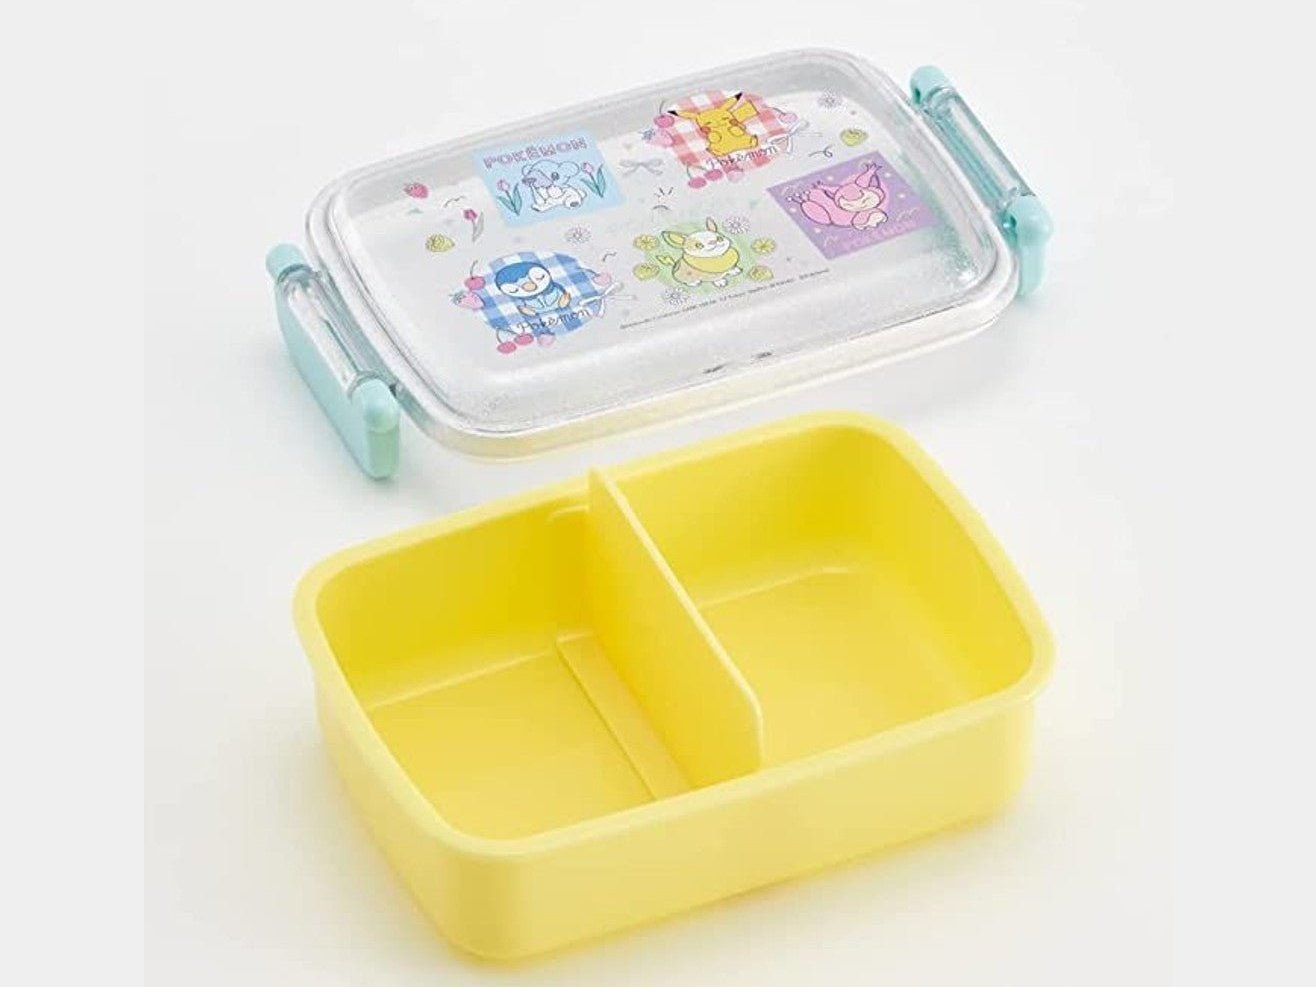 Skater Sanrio Characters Lunch Box 450ml As Shown in Figure One Size